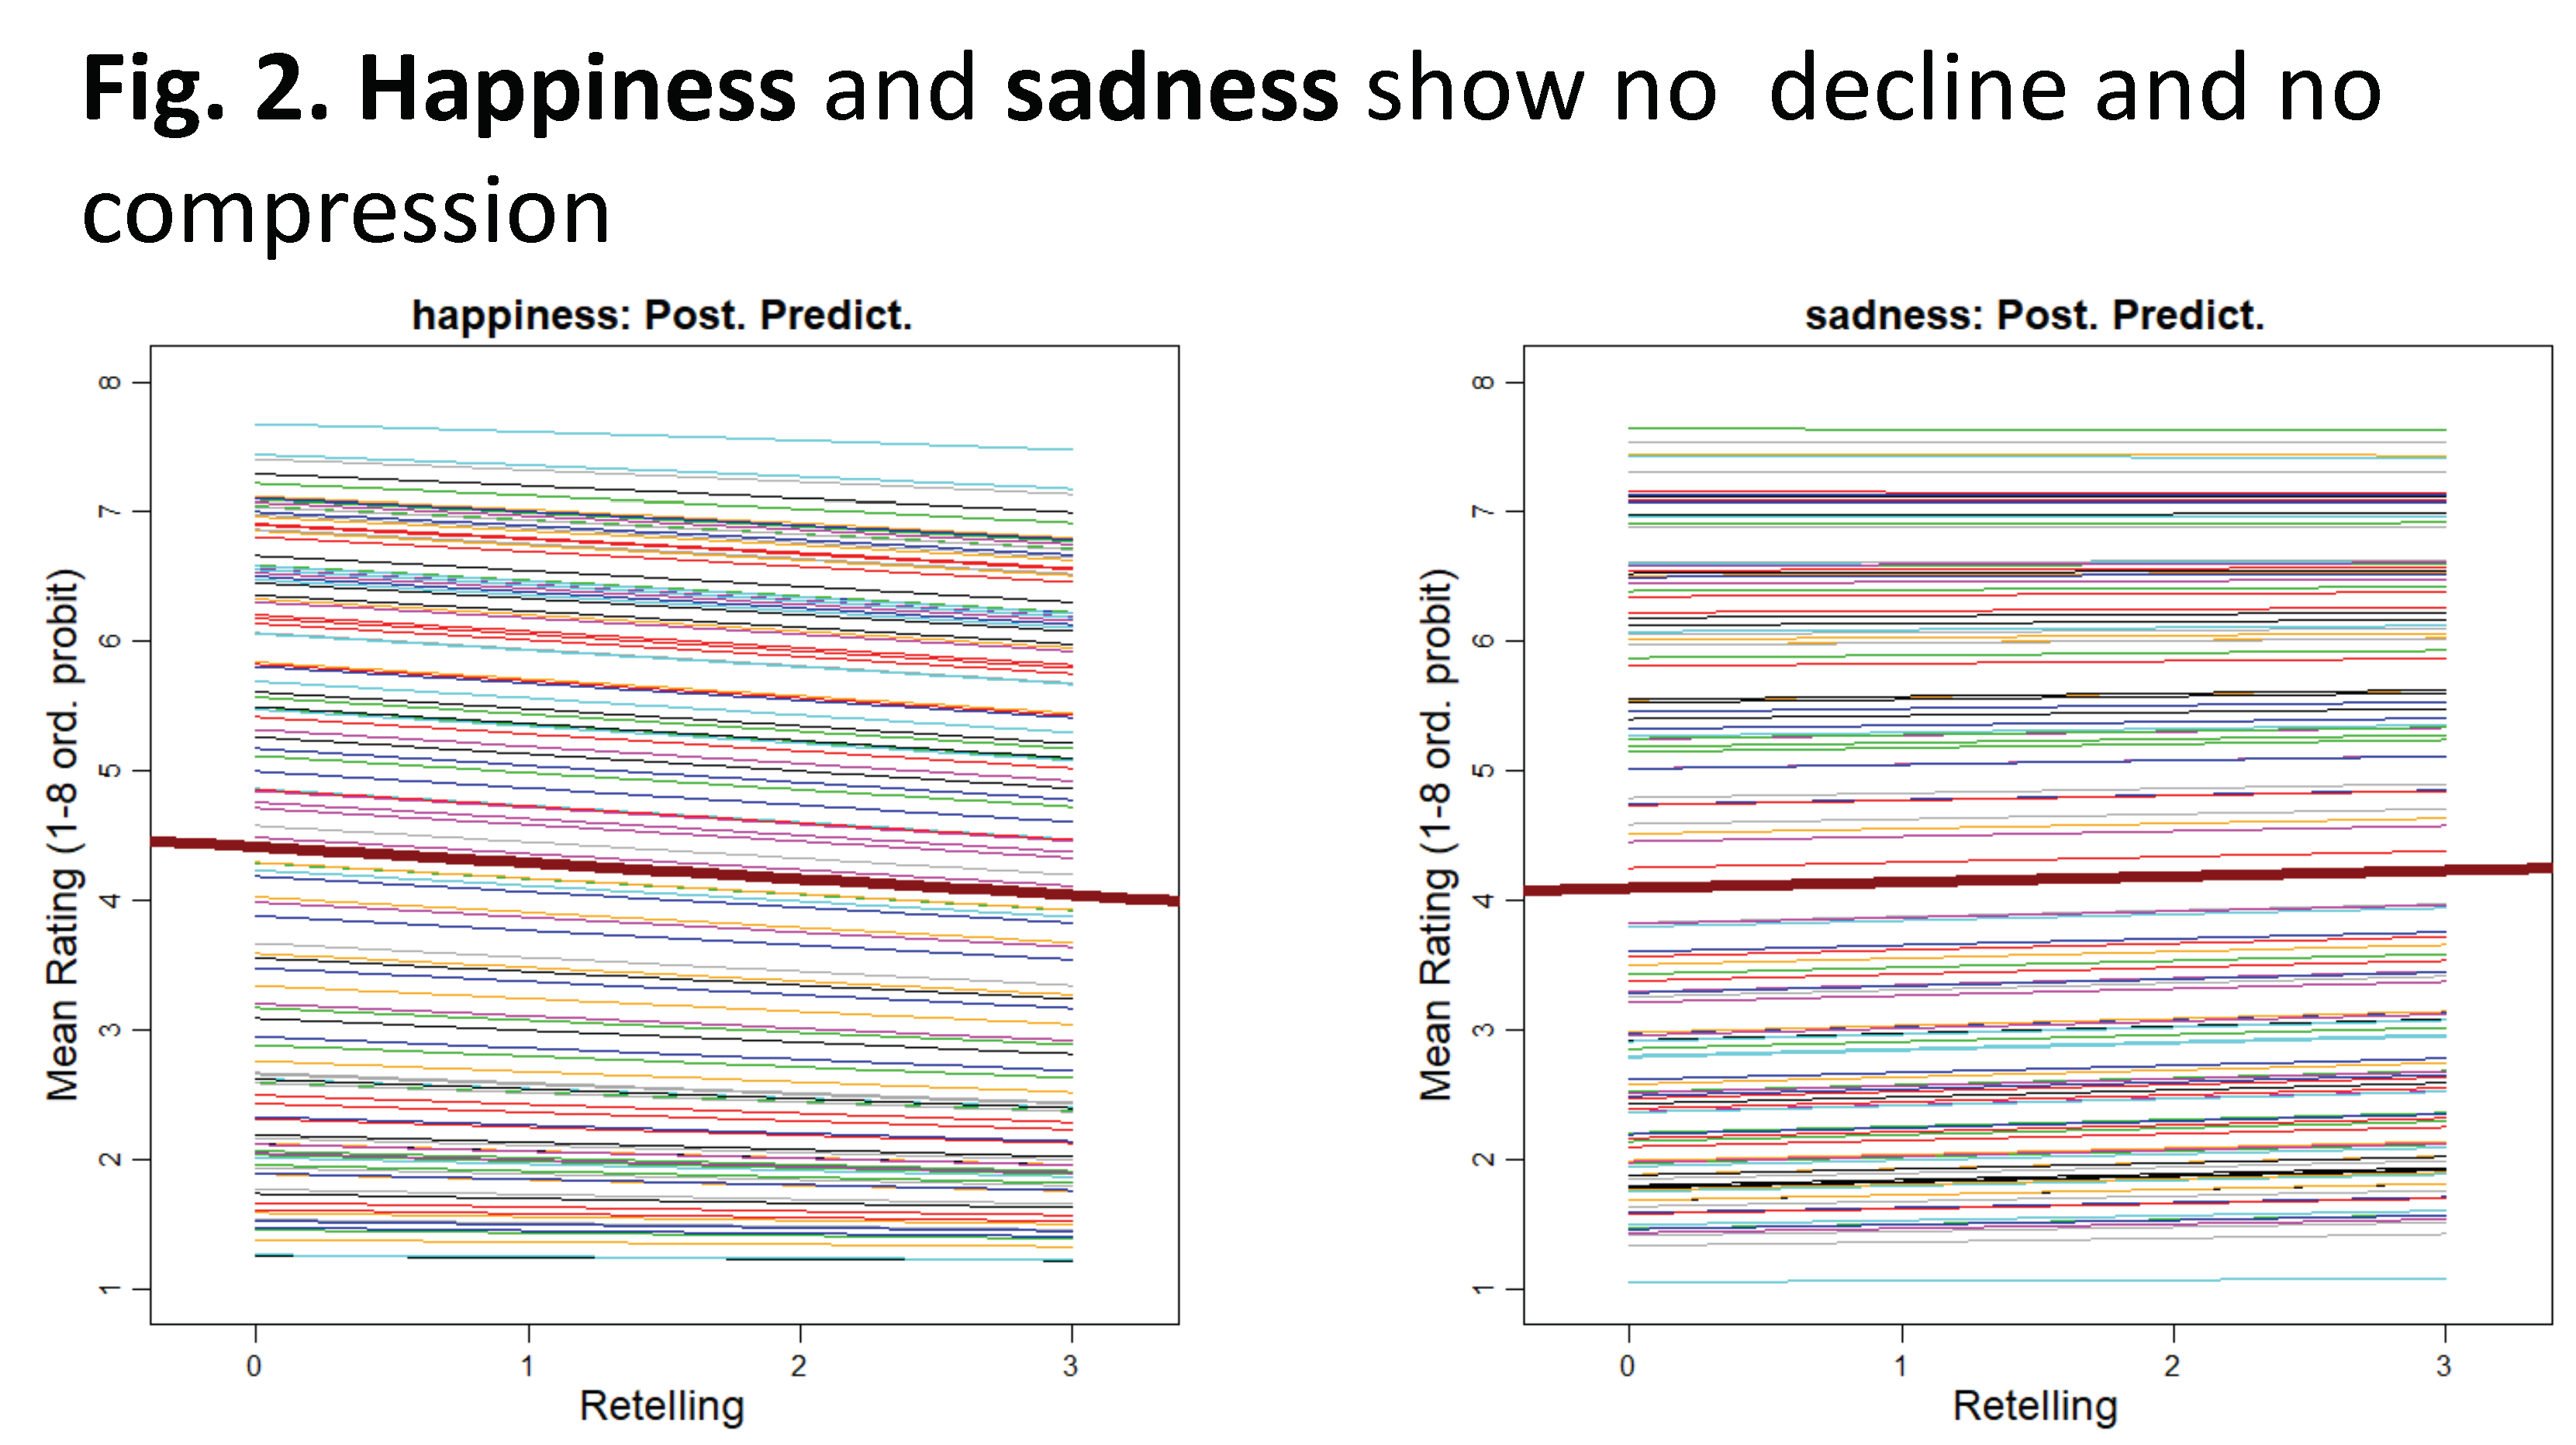 Happiness and sadness show no decline and no compression